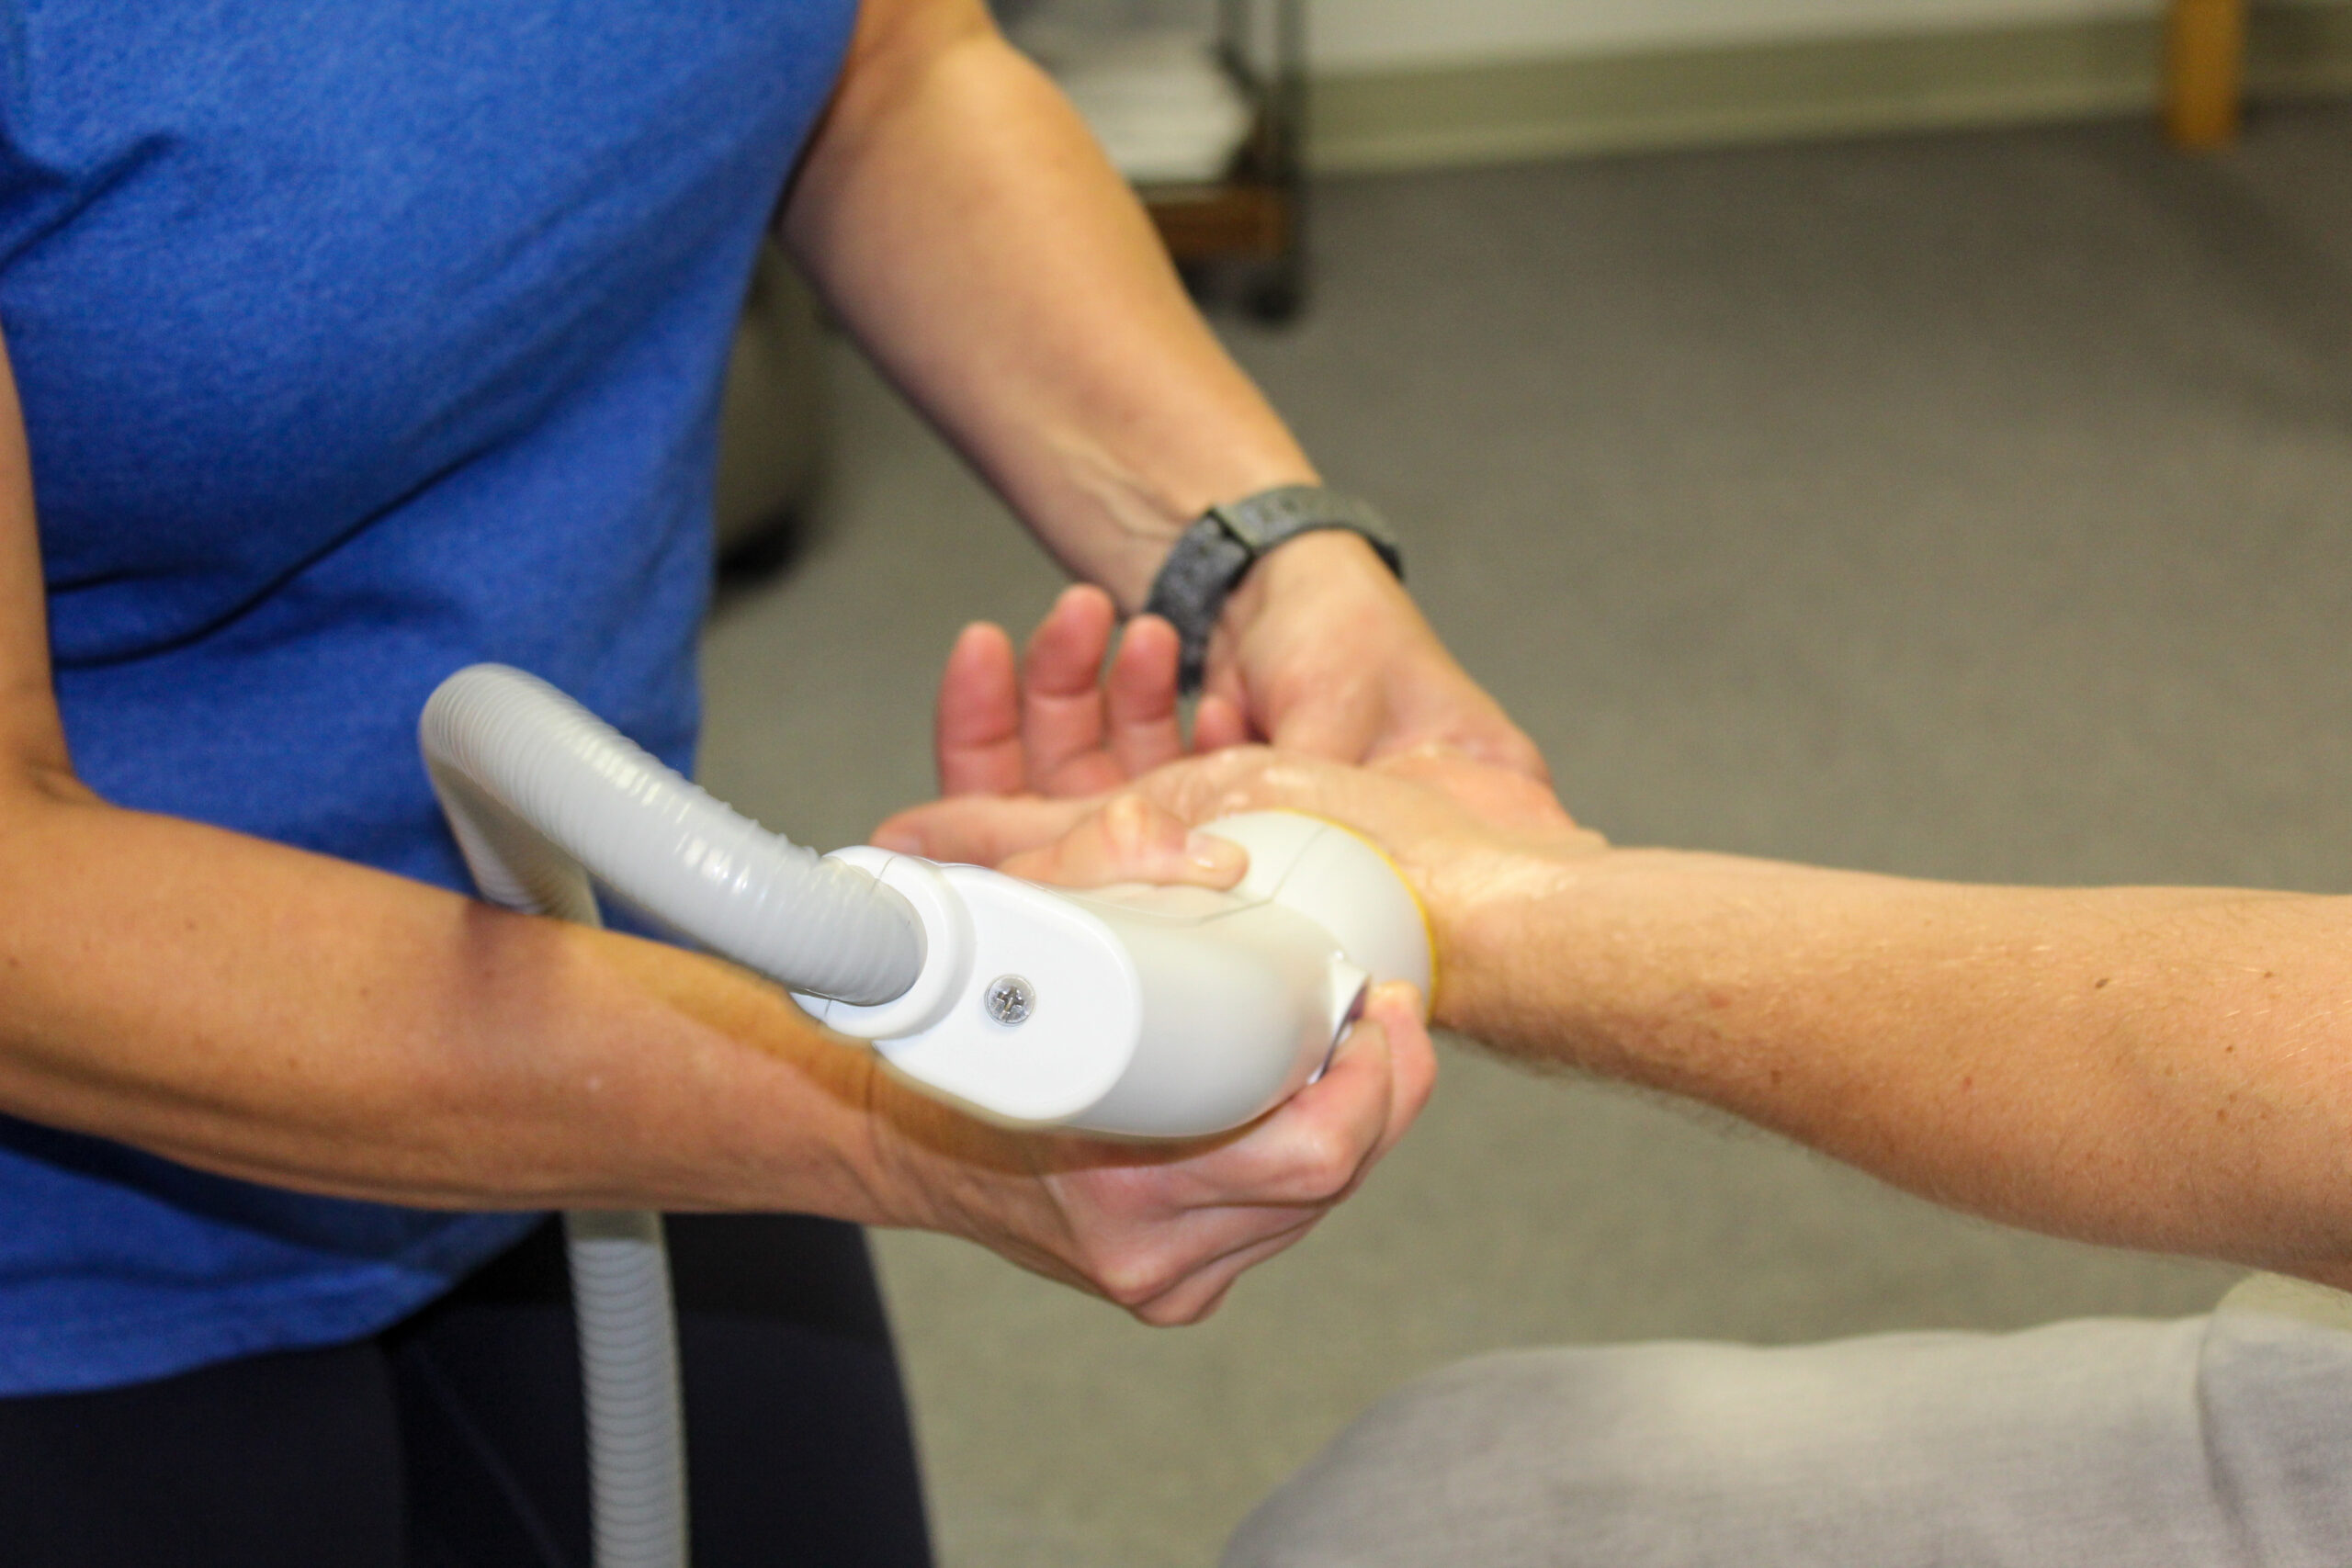 Image of the SoftWave machine being used on a wrist. 